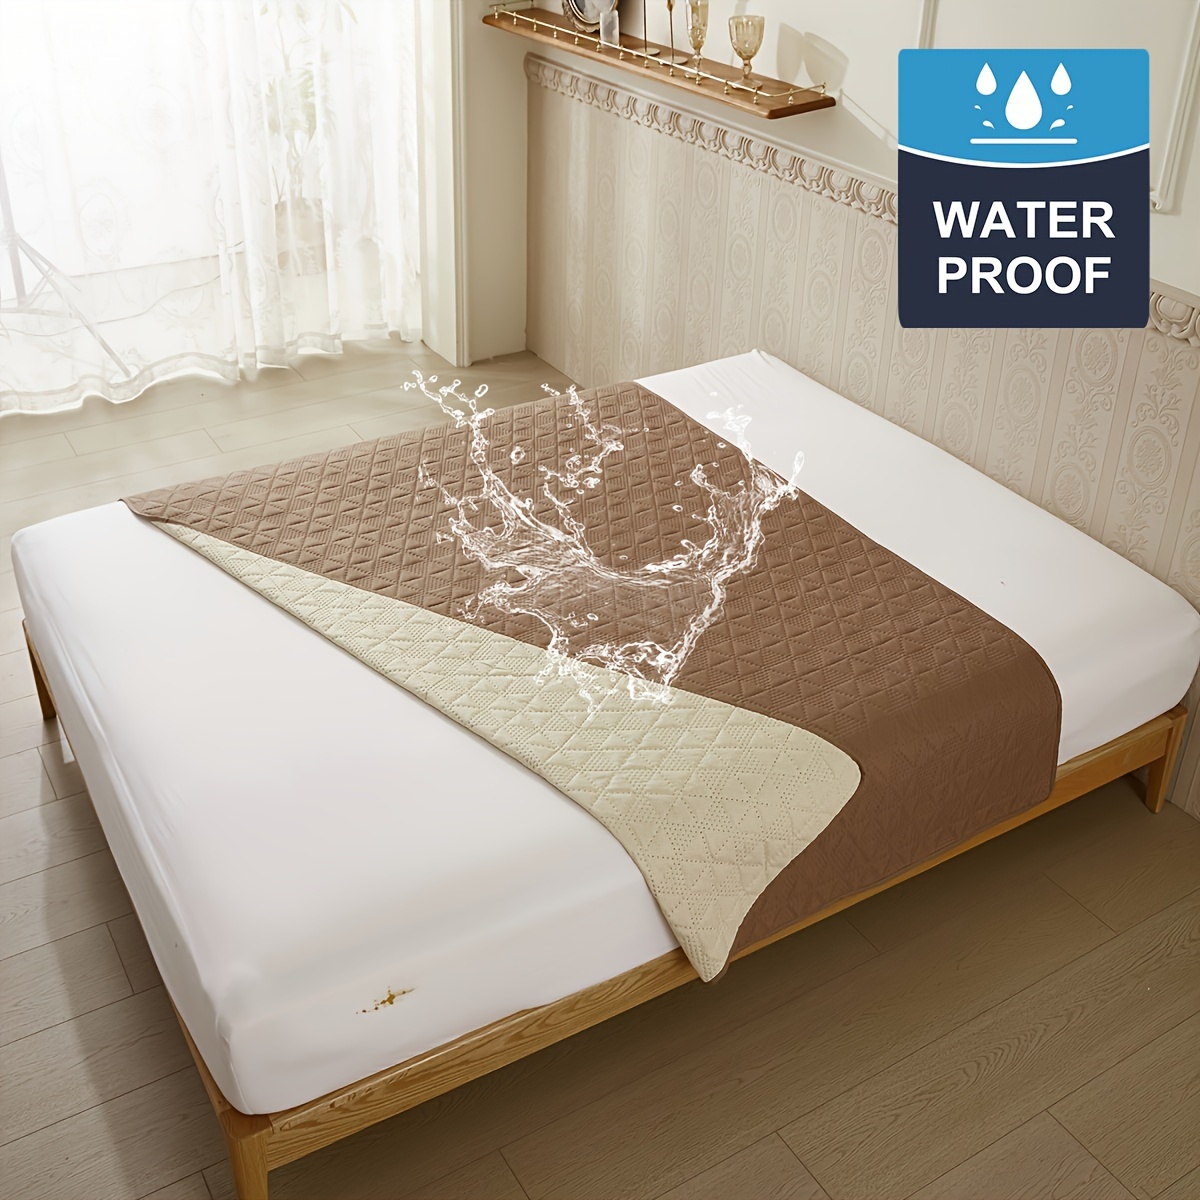 New Waterproof Mattress Pad, Dark Colored to Hide Stains